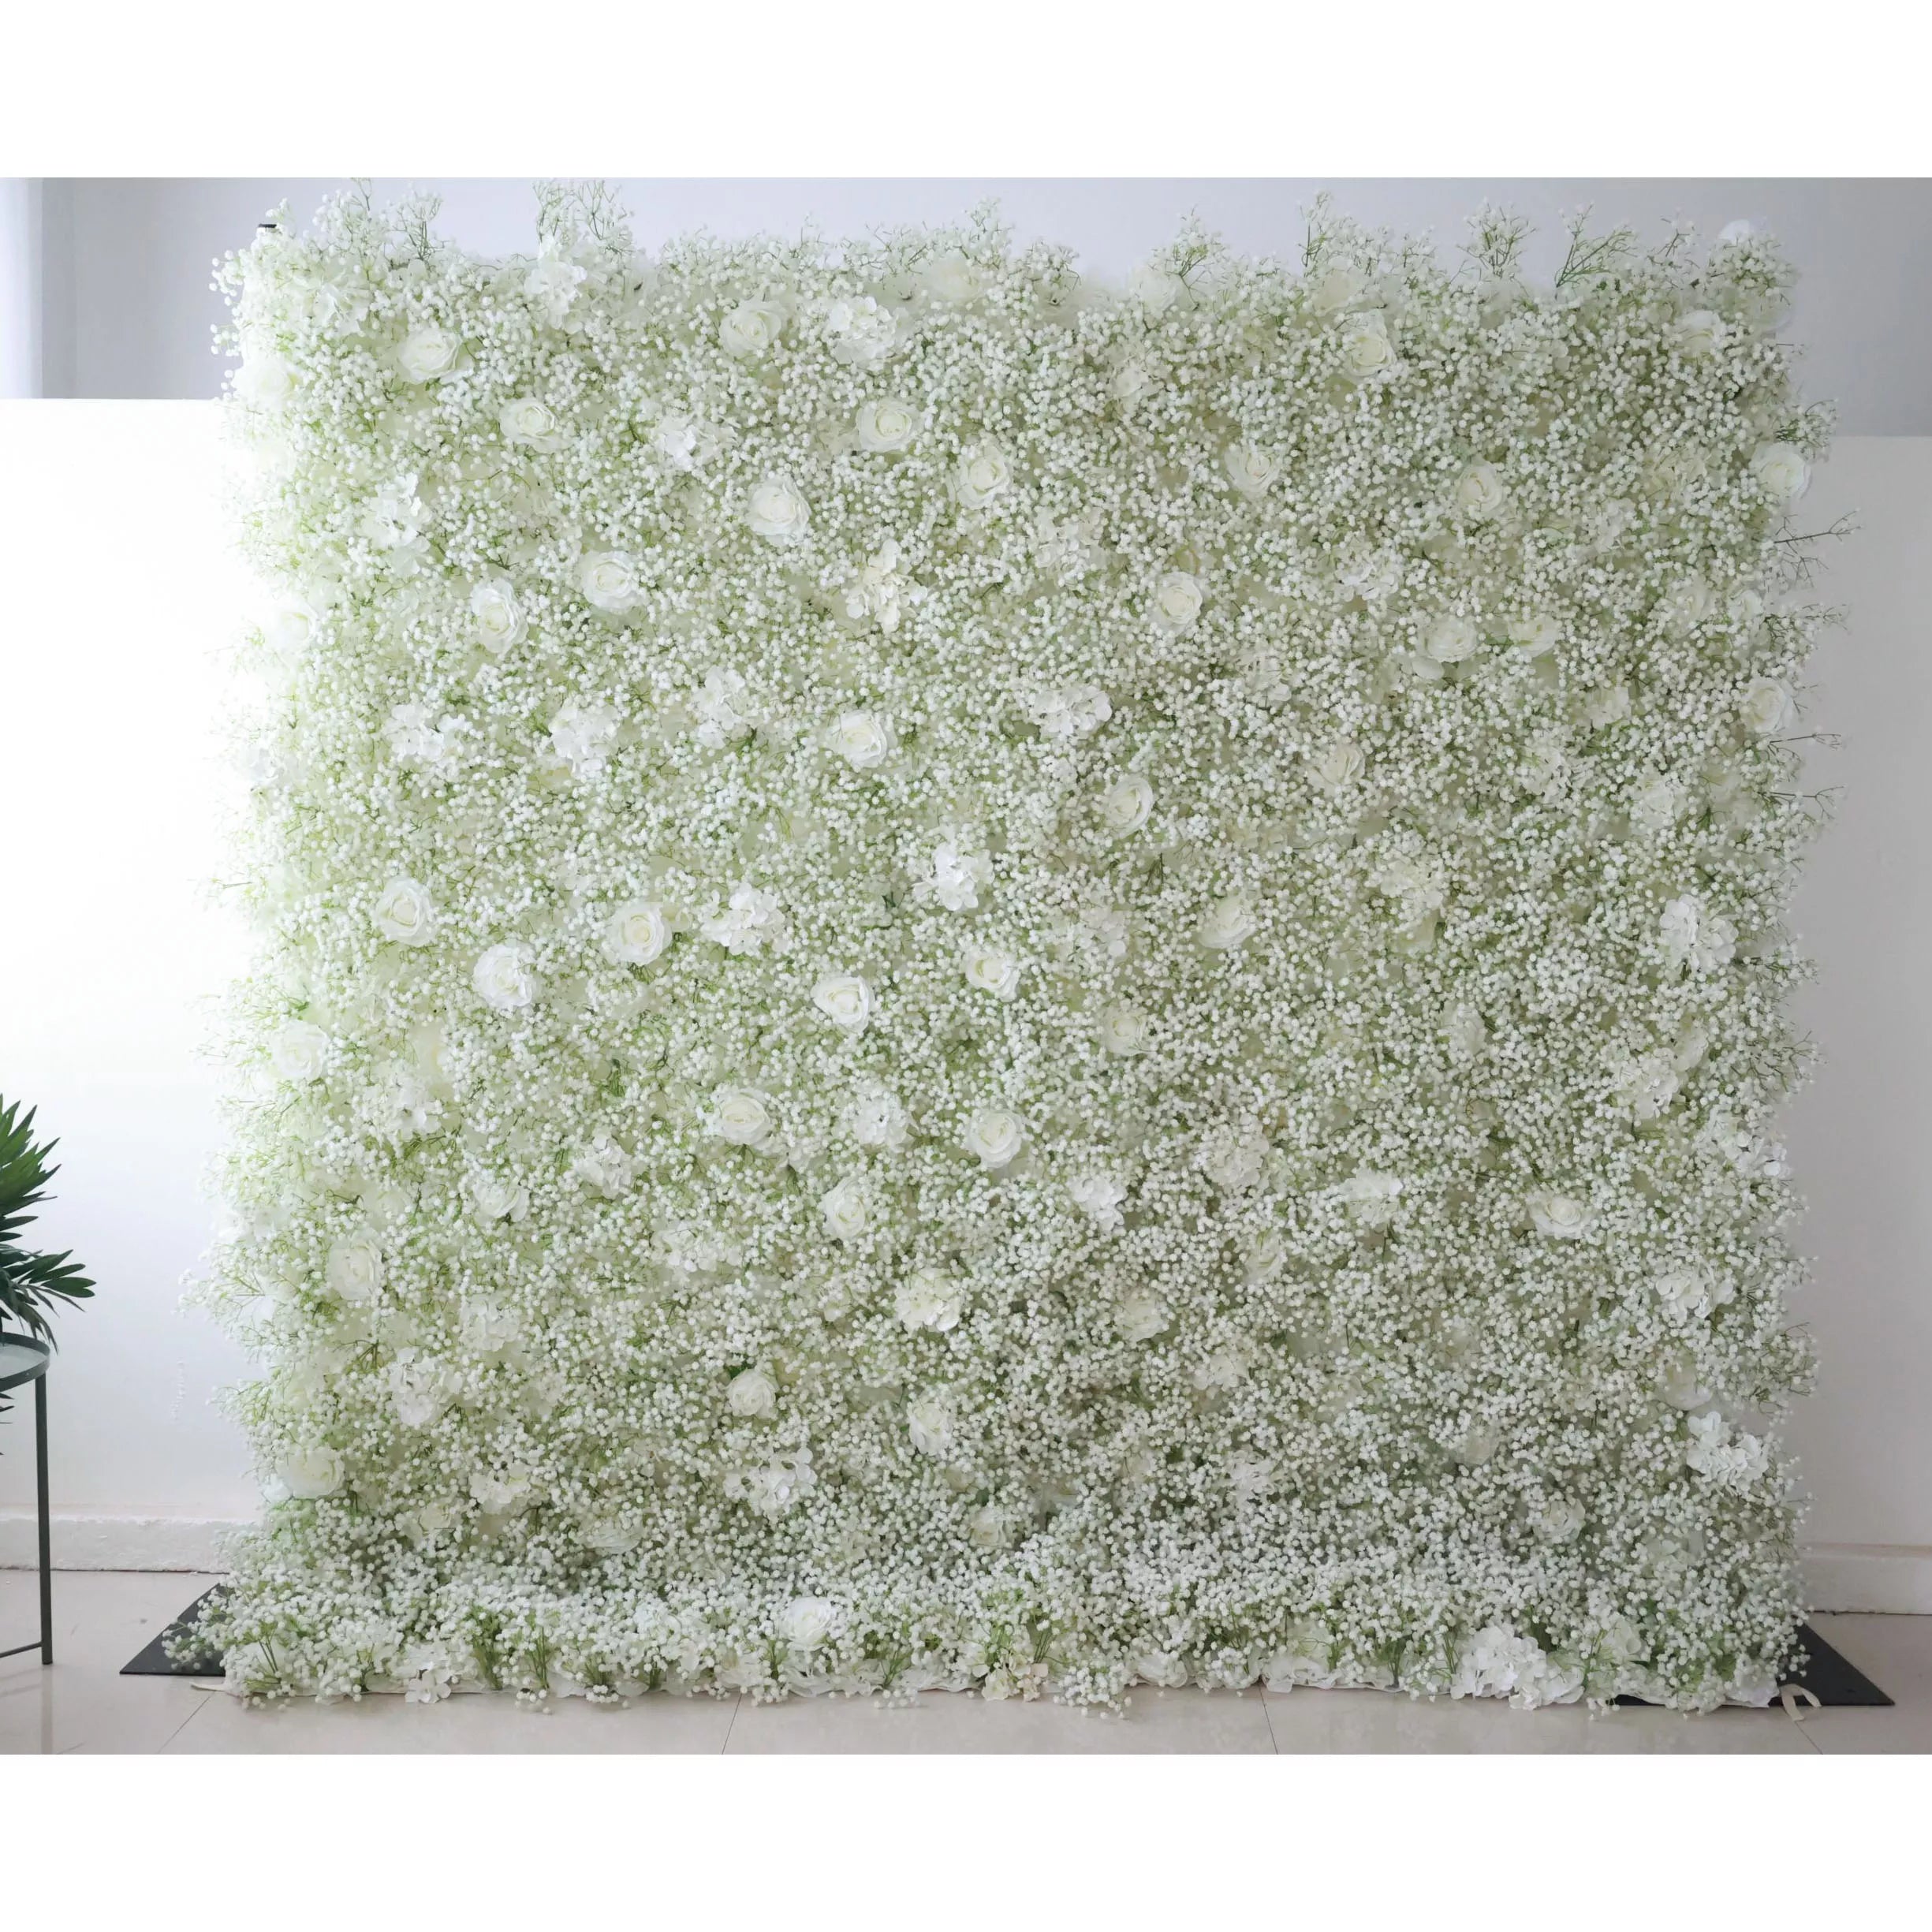 ValarFlower Artificial Floral Wall Backdrop: Elysian Garden Artificial Floral Wall Backdrop: Ethereal White Blossoms Edition-VF-268